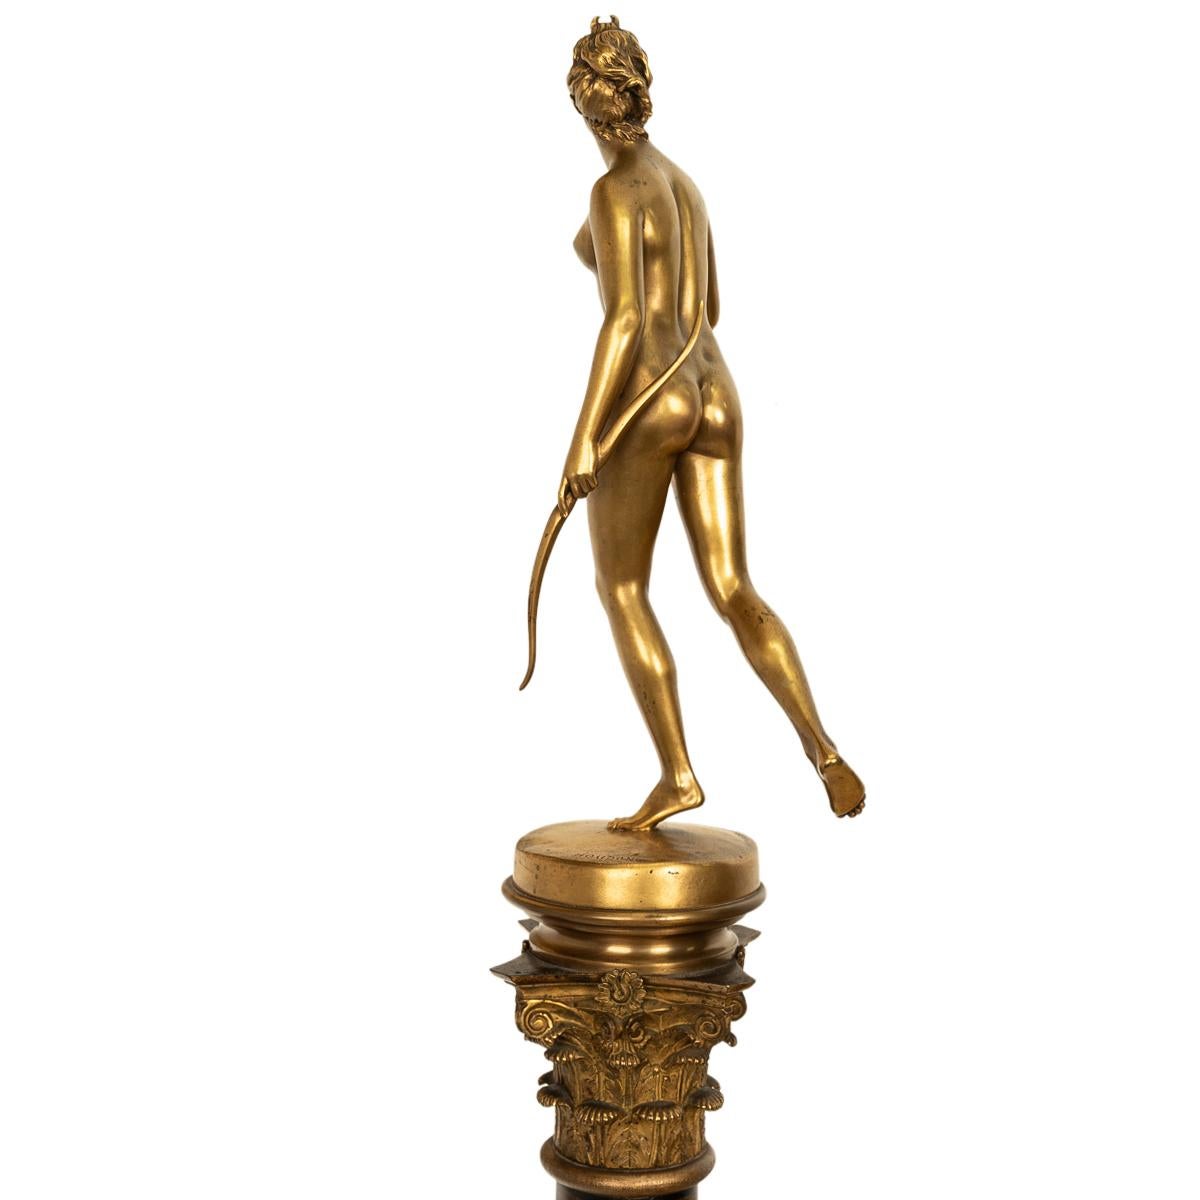 Antique French Grand Tour Gilt Bronze Statue on Column Diana the Huntress 1838 For Sale 4